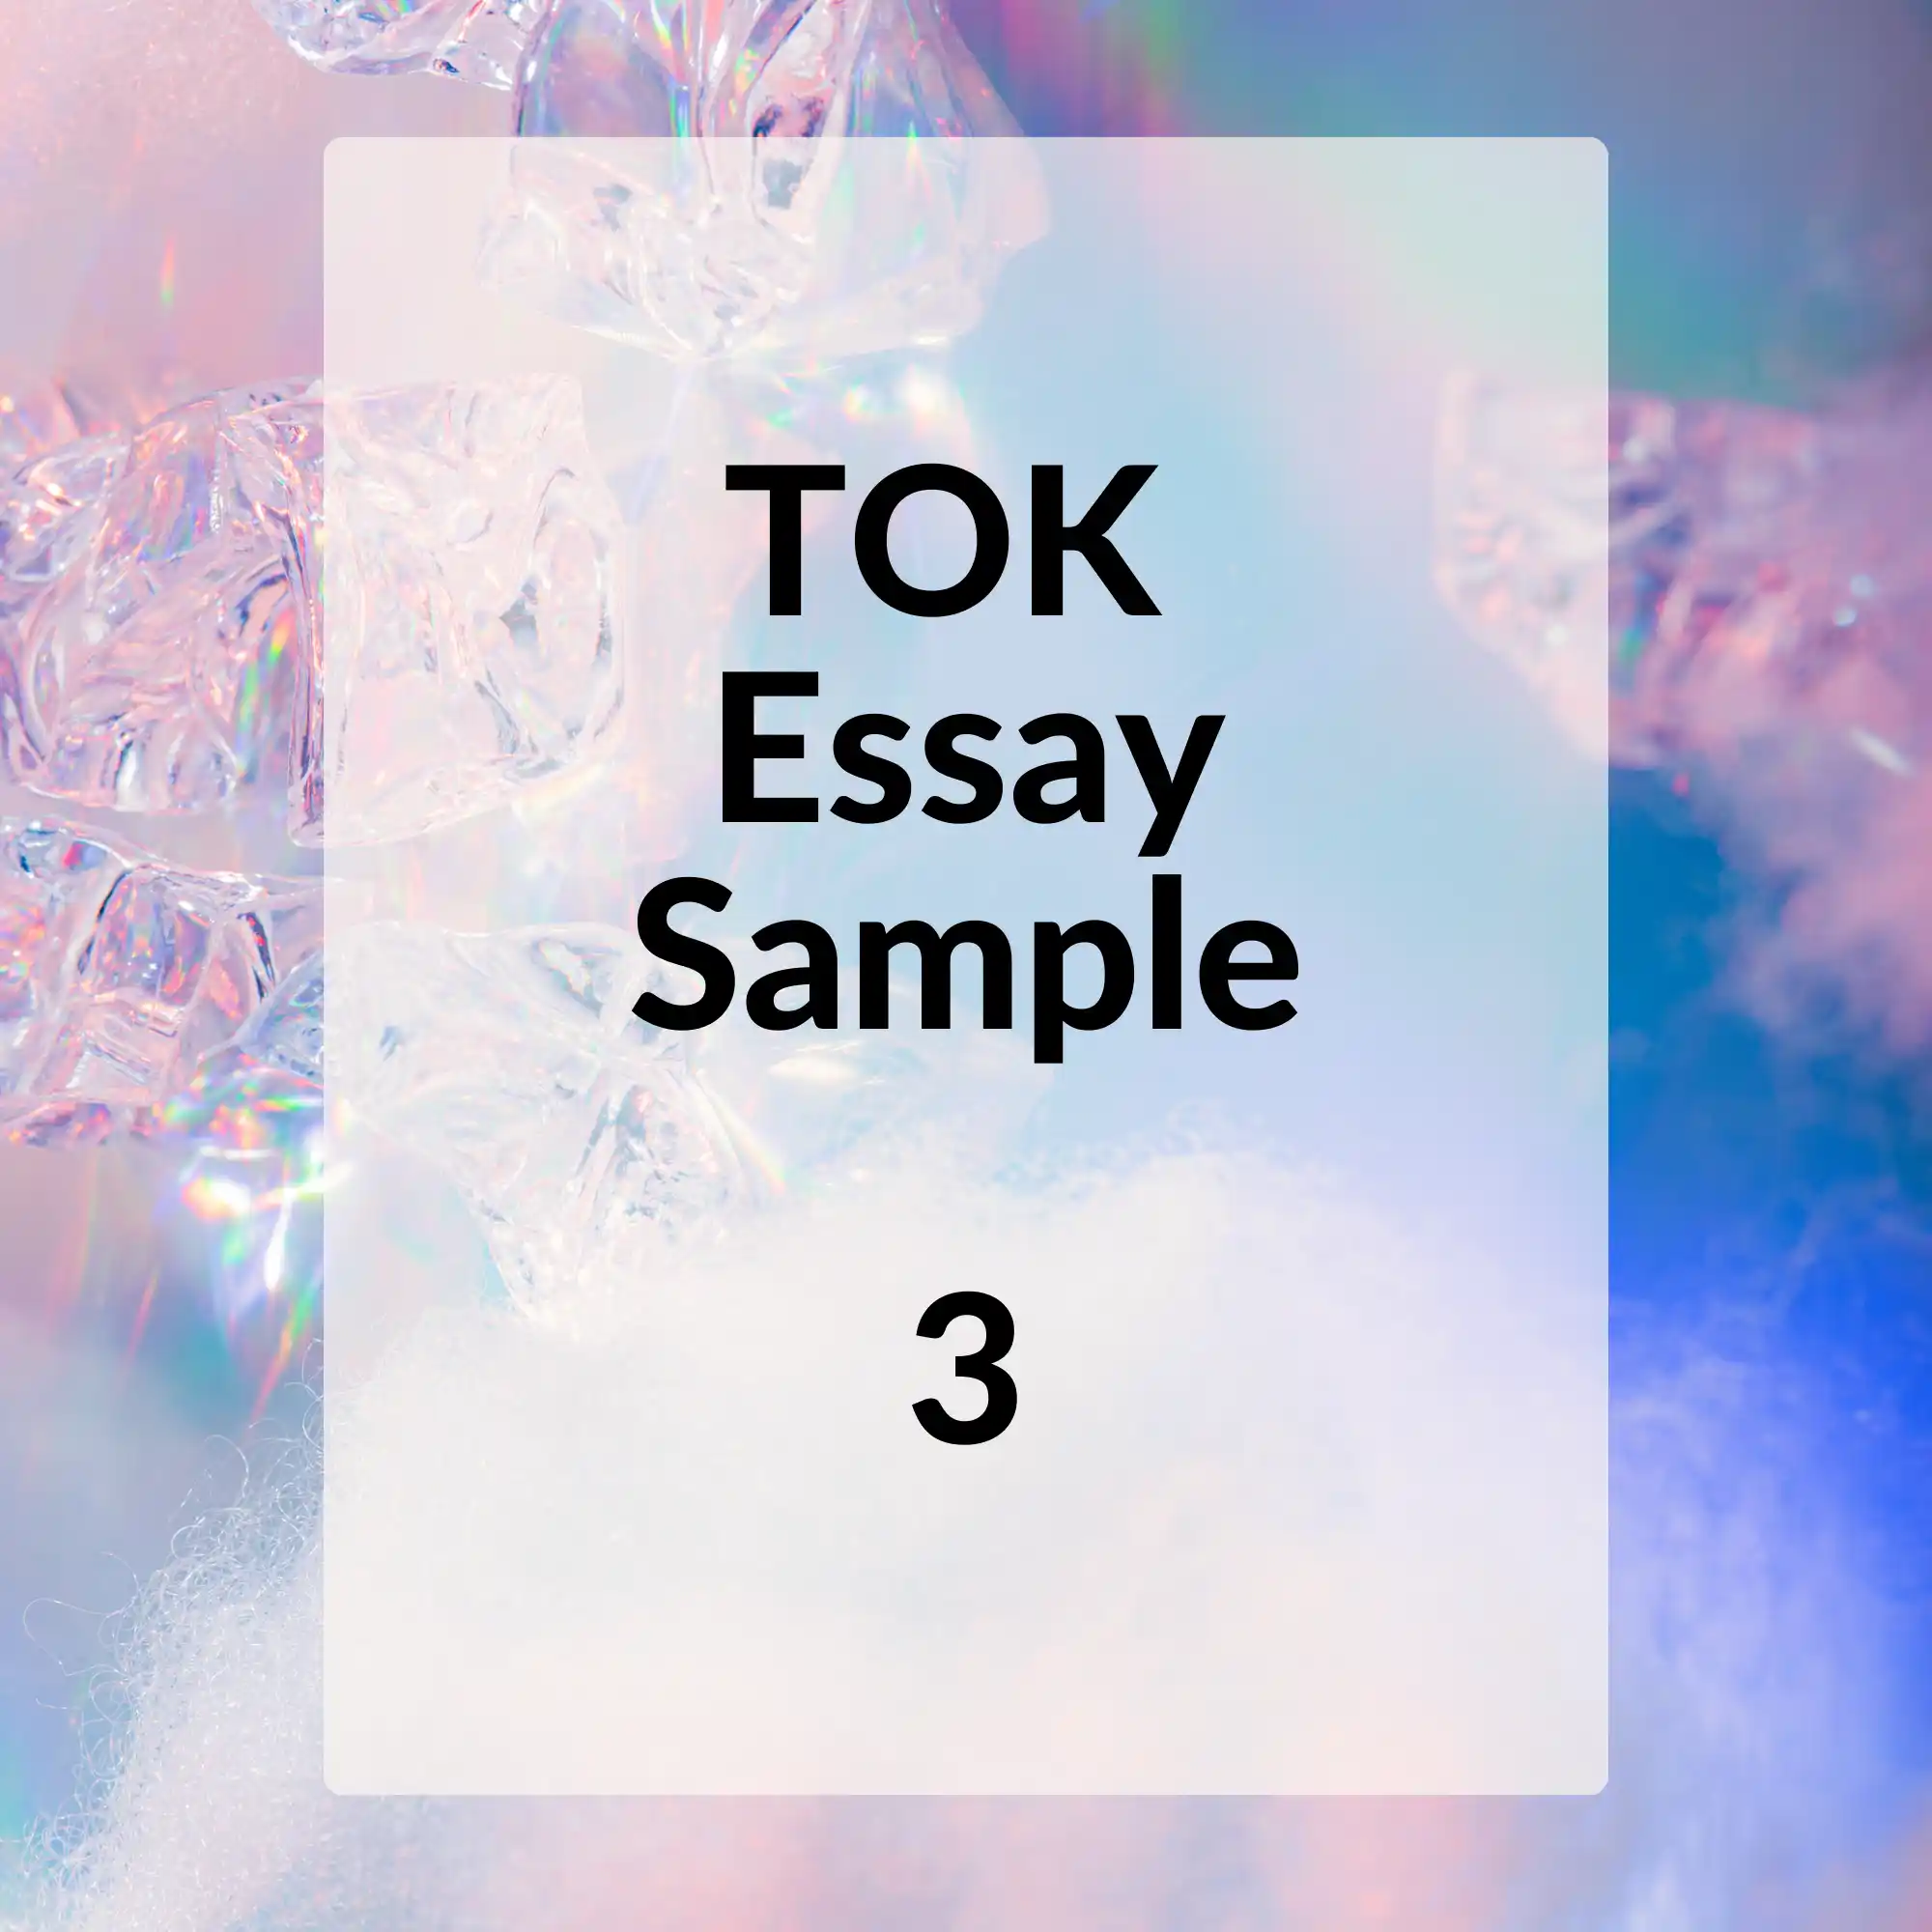 A square image with a whimsical, iridescent background featuring ice crystals, with a central white rectangle that reads "TOK Essay Sample 3" in black font and the number "3" prominently displayed at the bottom.